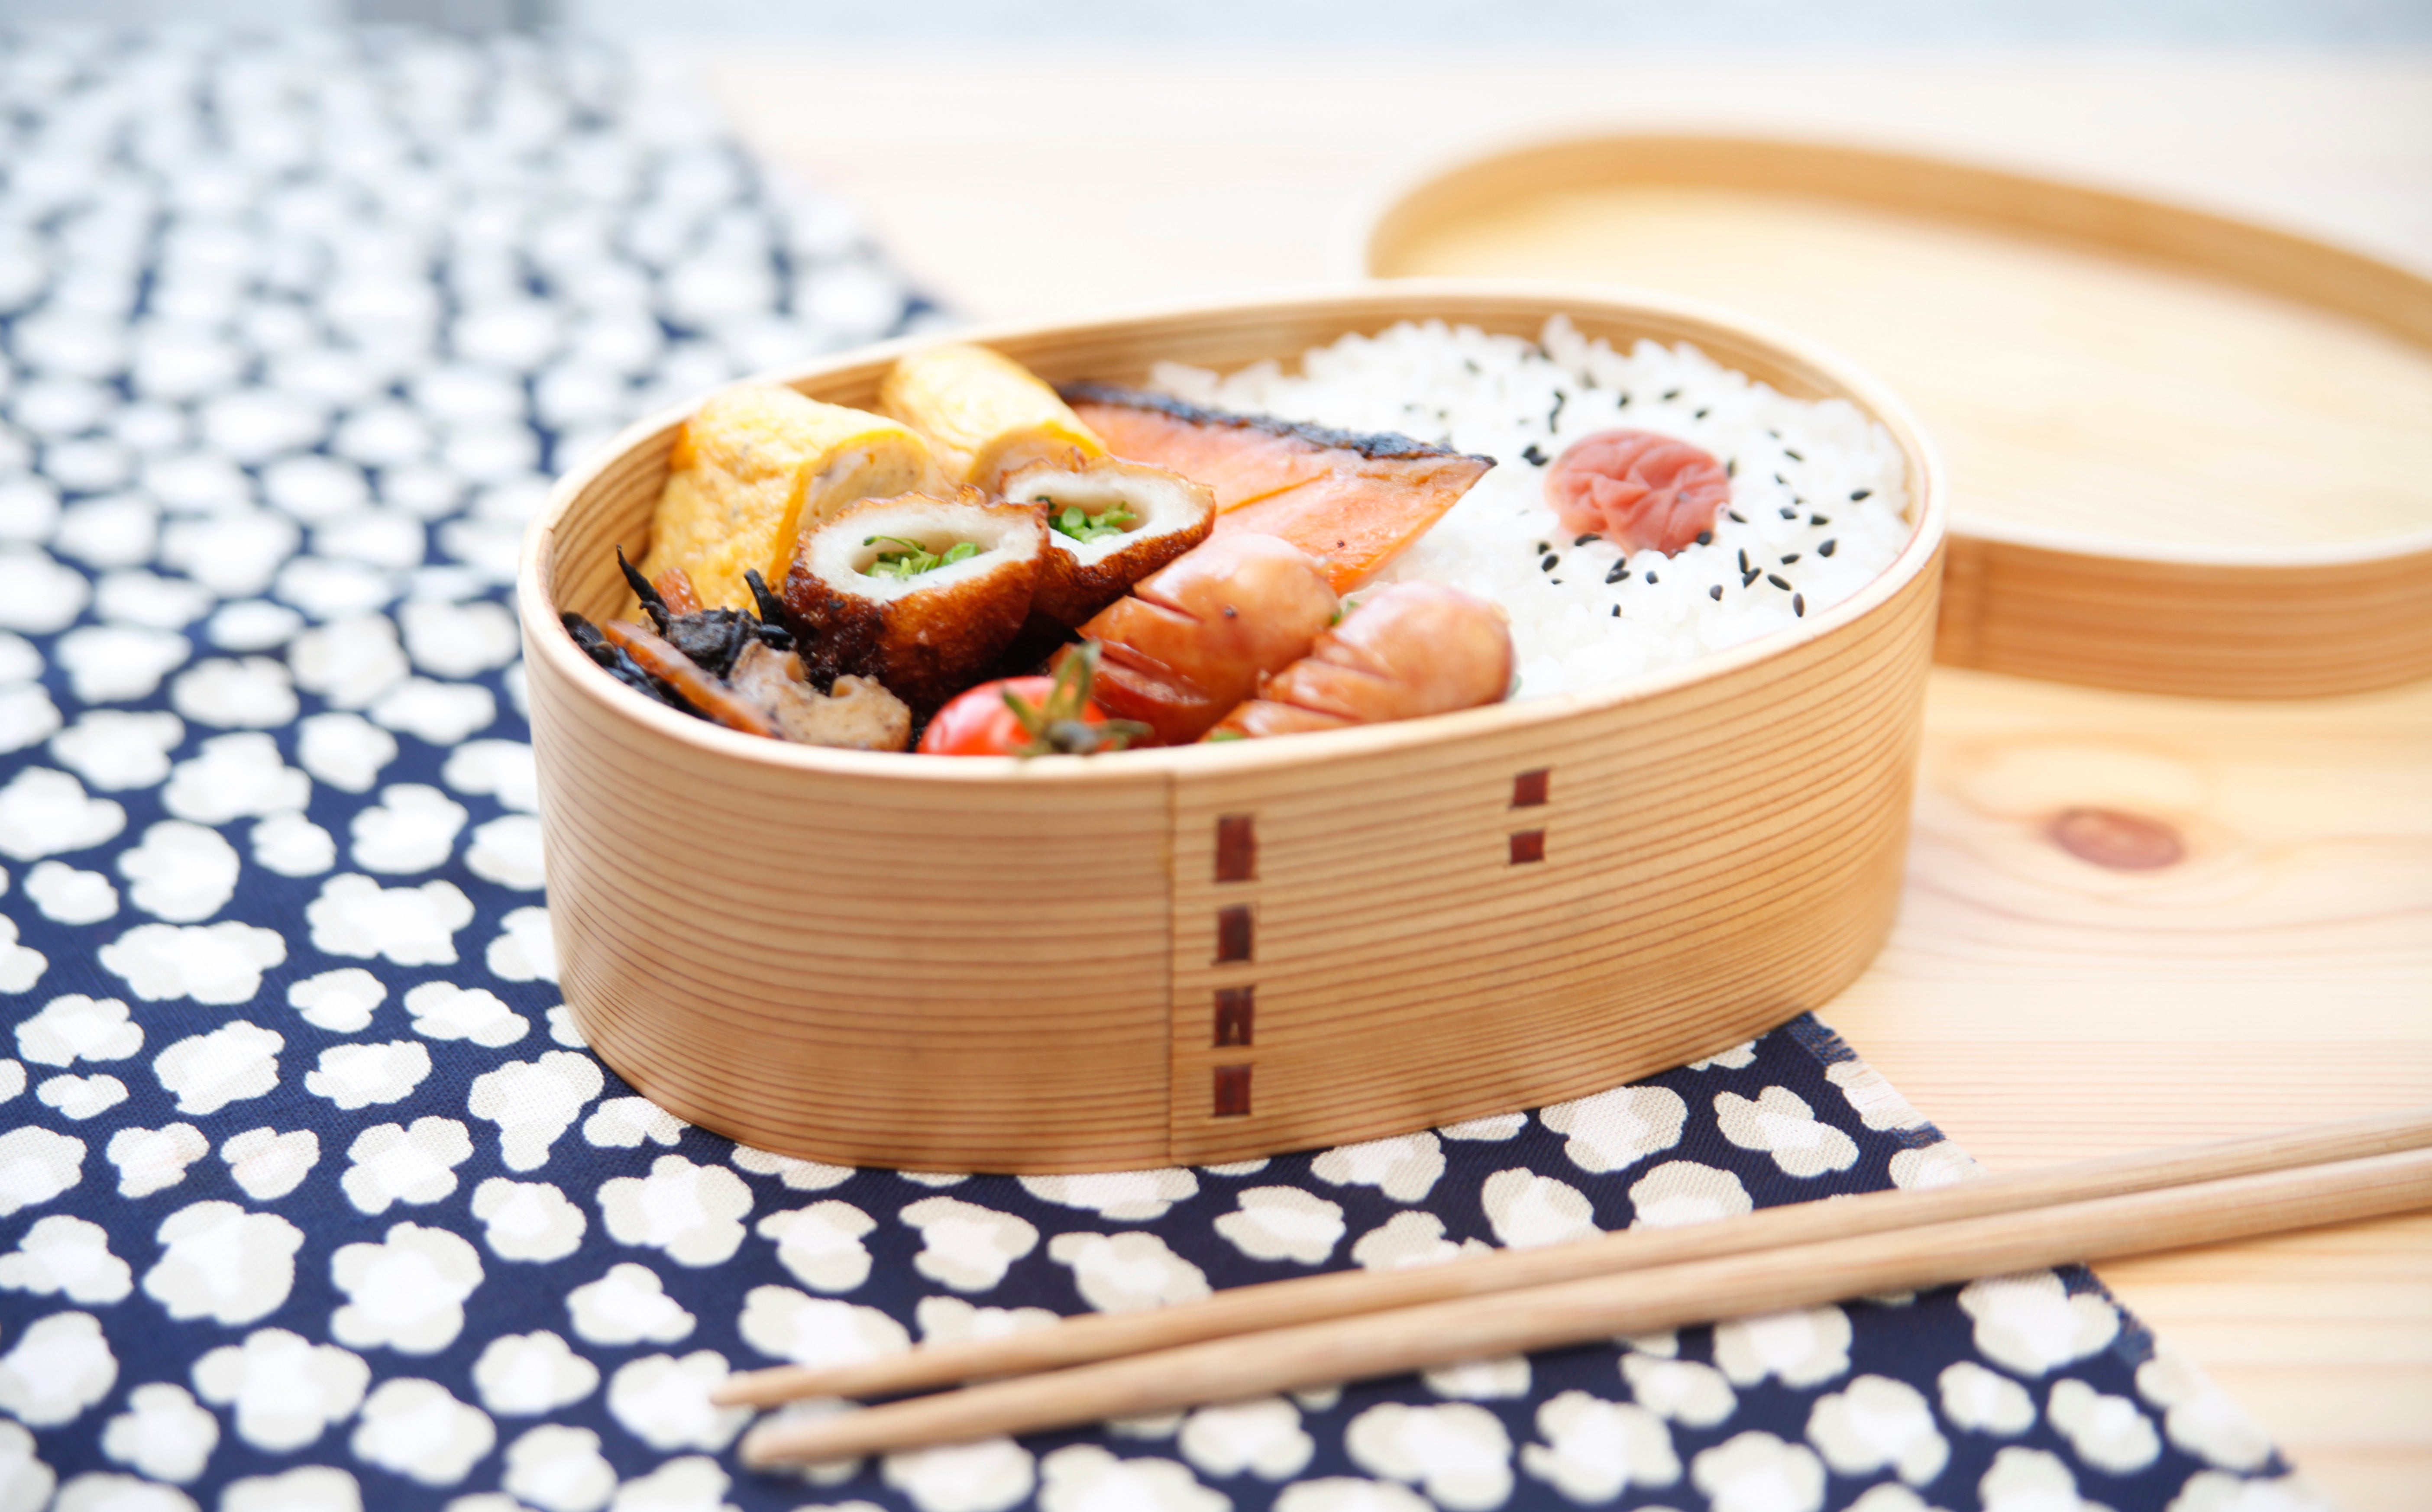 Bento Box Ideas, useful tools and accessories - Chopstick Chronicles